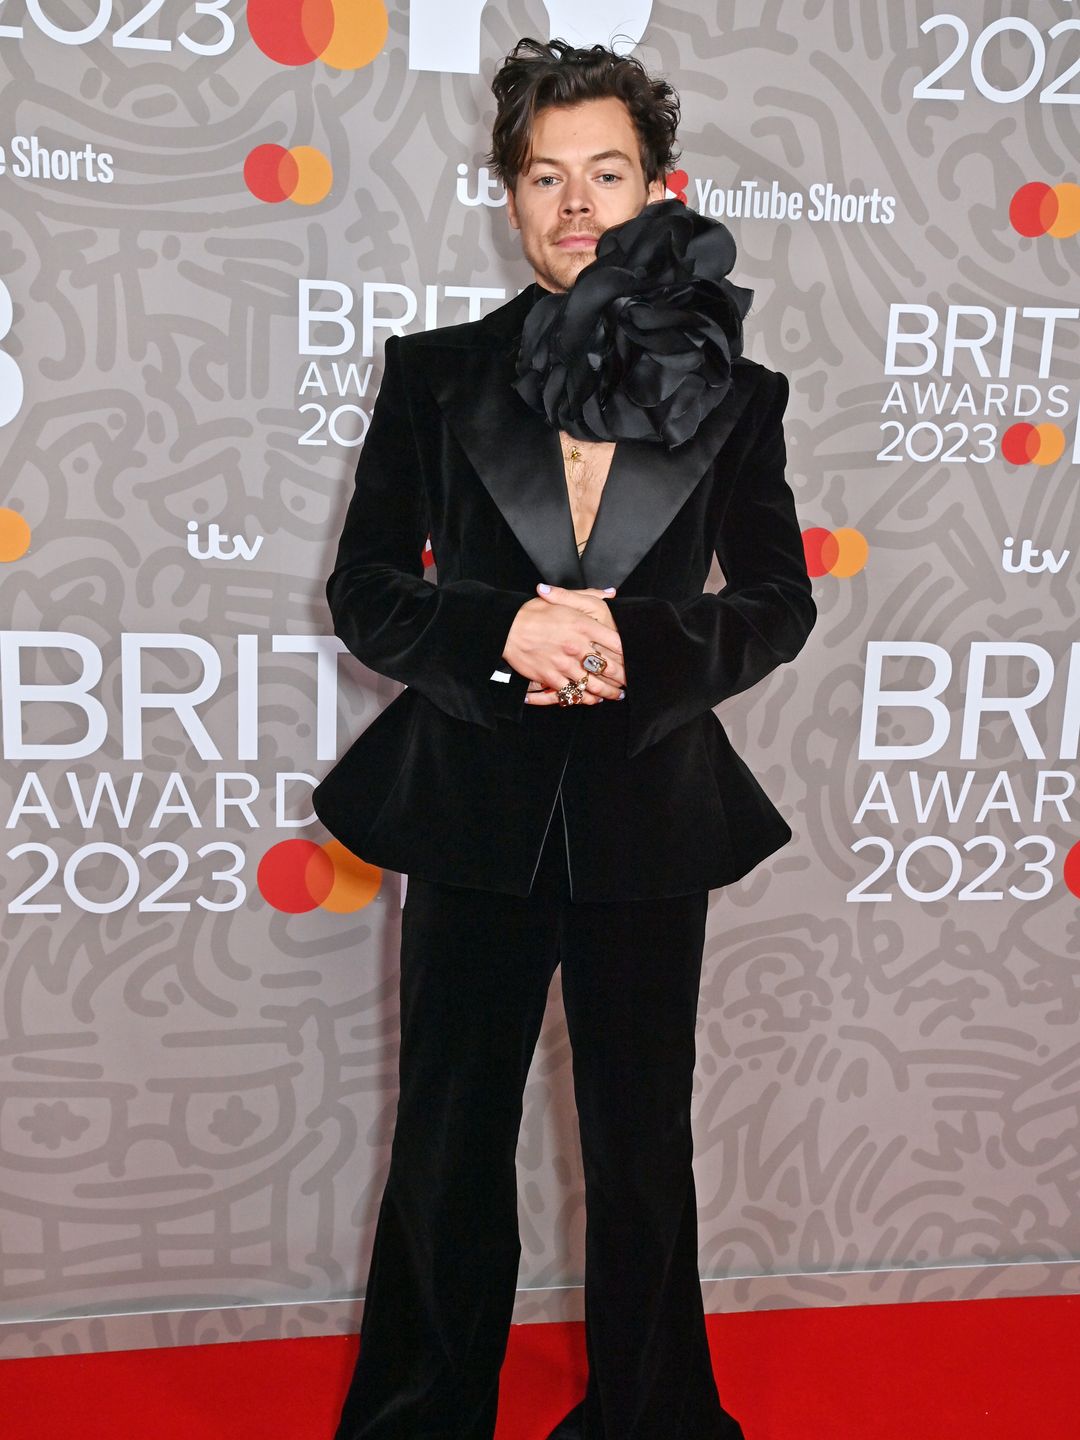 Harry Styles arrives at The BRIT Awards 2023 wearing a black suit